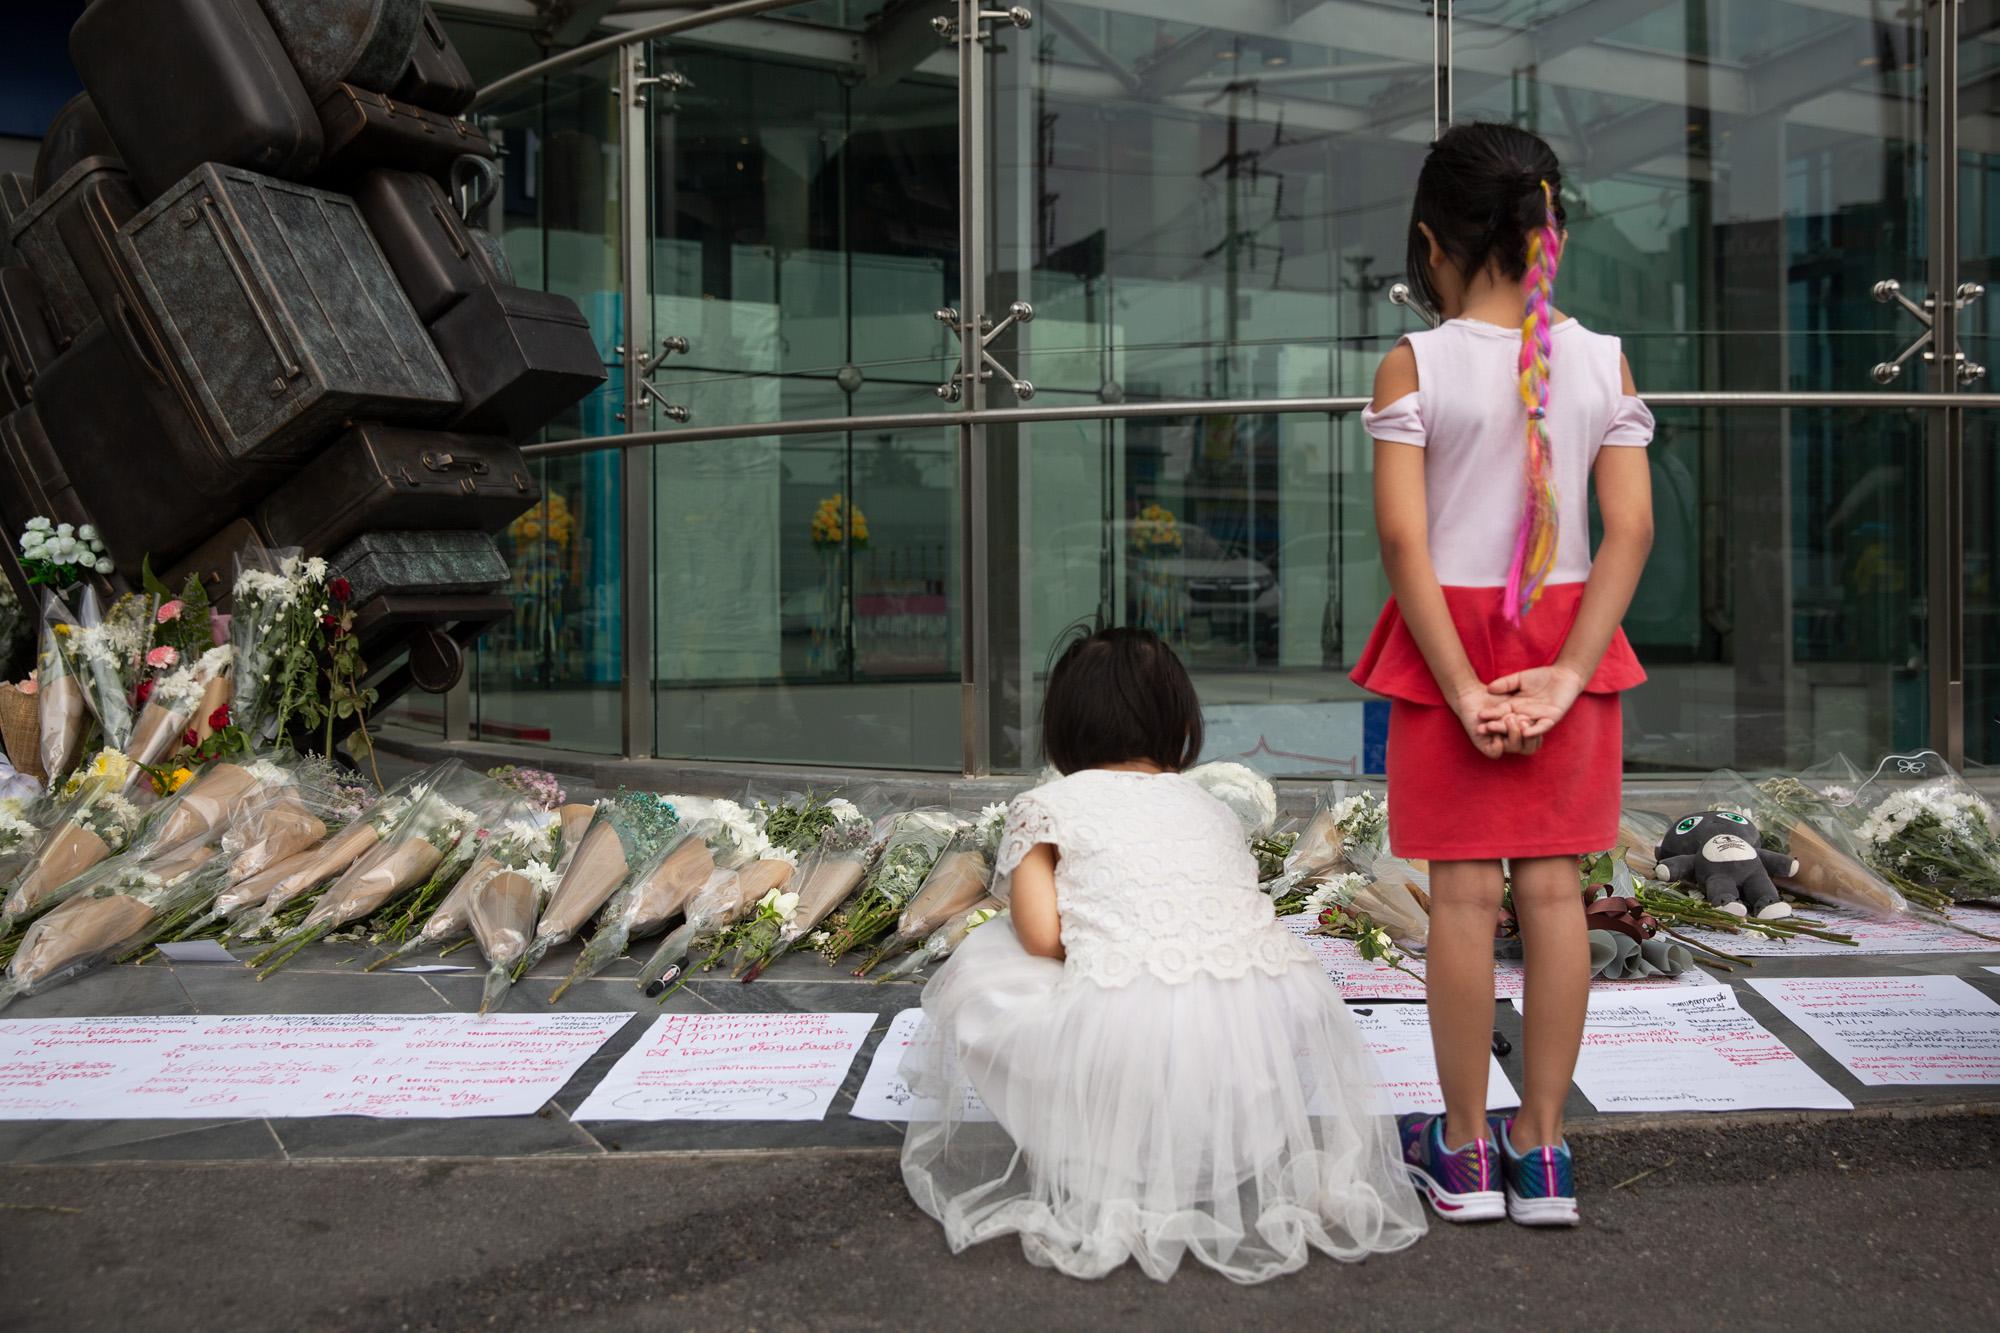 Shooting in Korat, Thailand: The New York Times - Two girls visit a memorial for those killed during the...